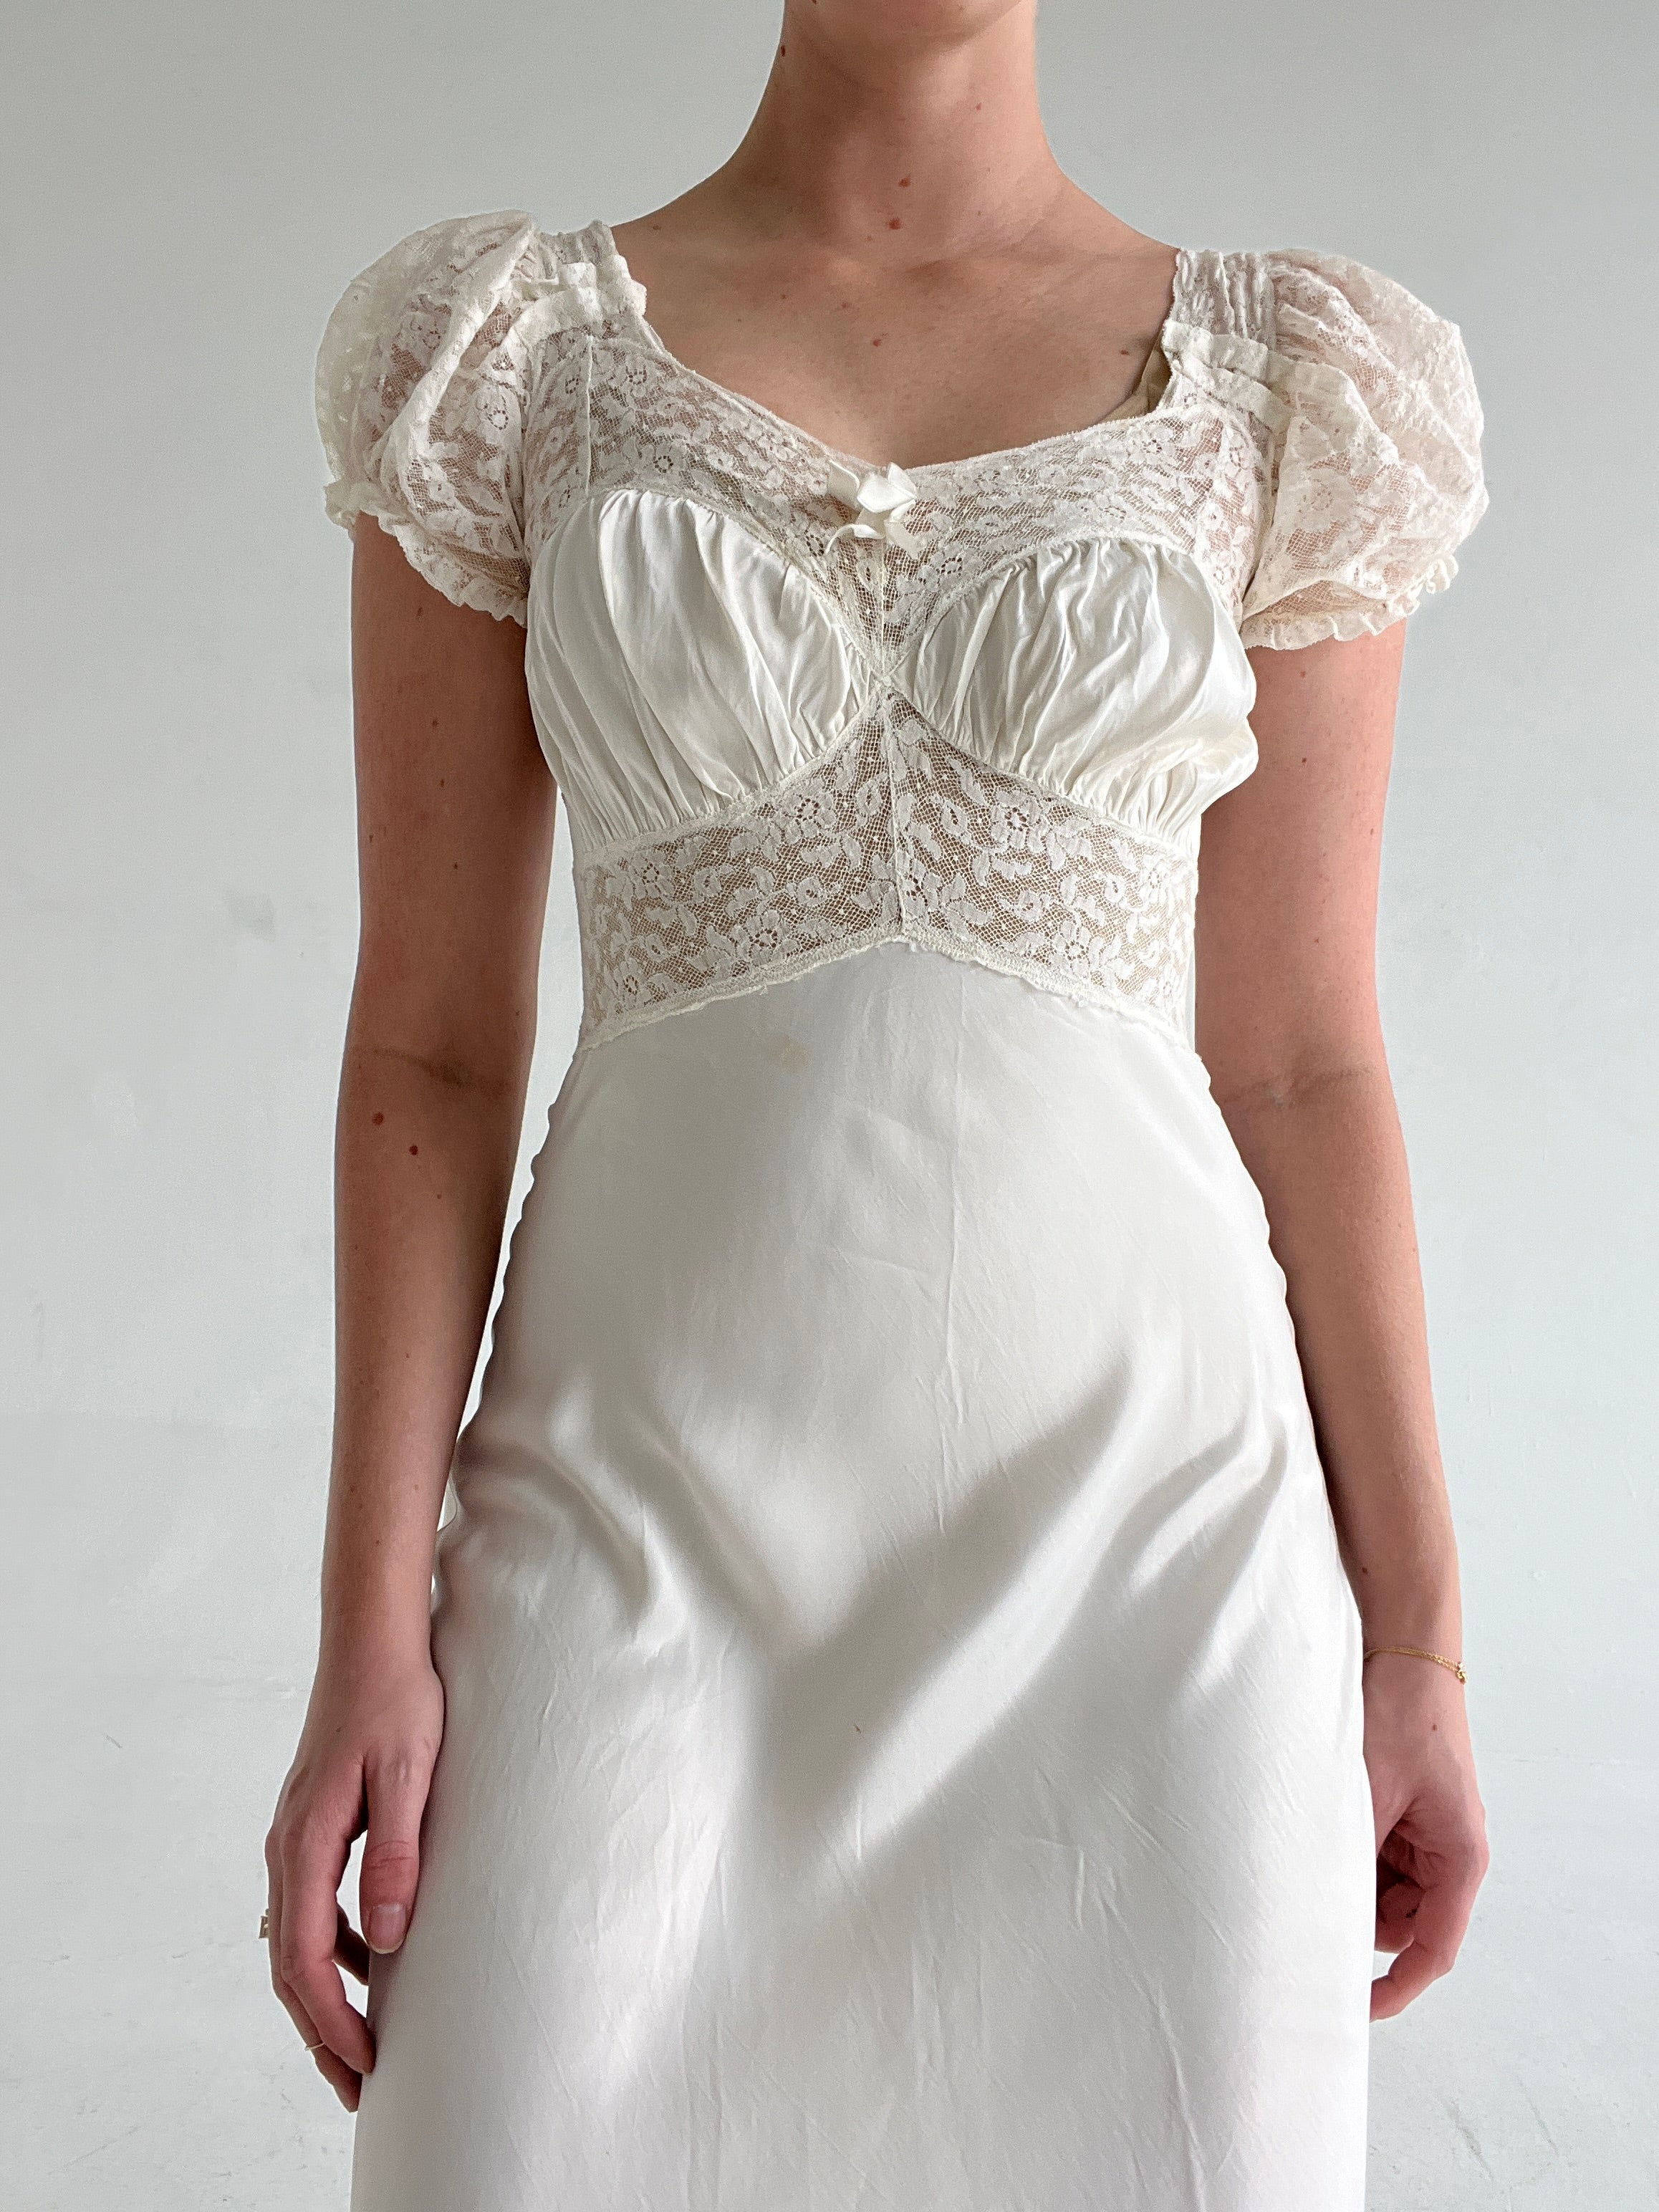 1940's Bridal White Slip Dress with Lace Puffed Sleeve